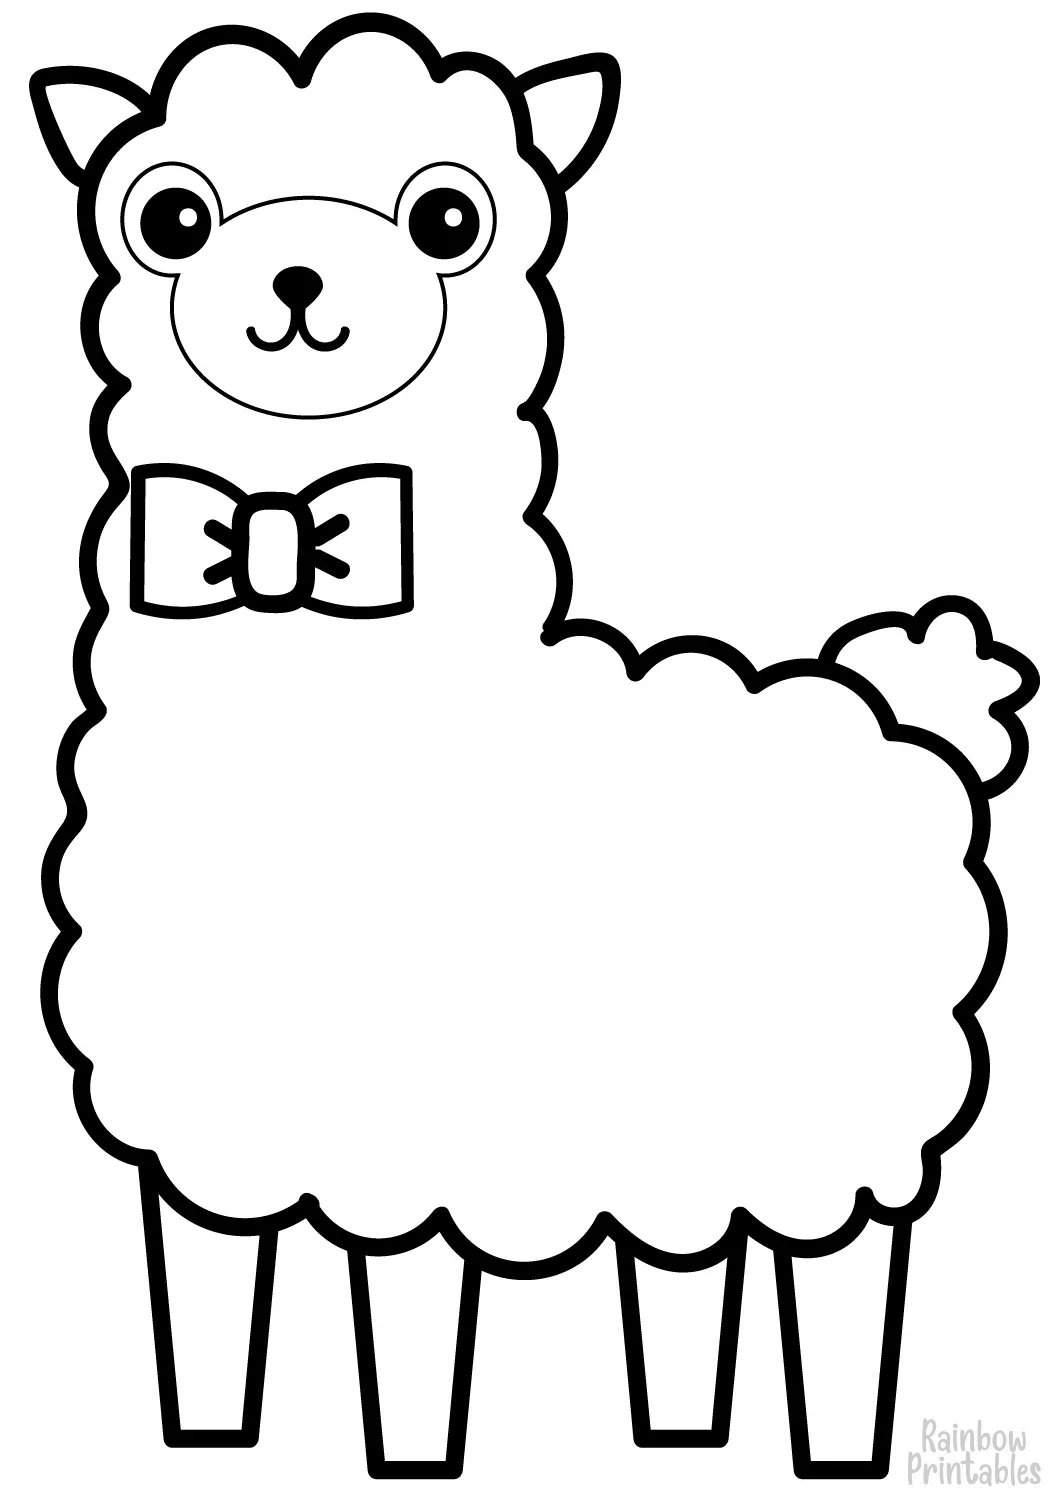 SIMPLE-for-kids-alpaca-coloring-page